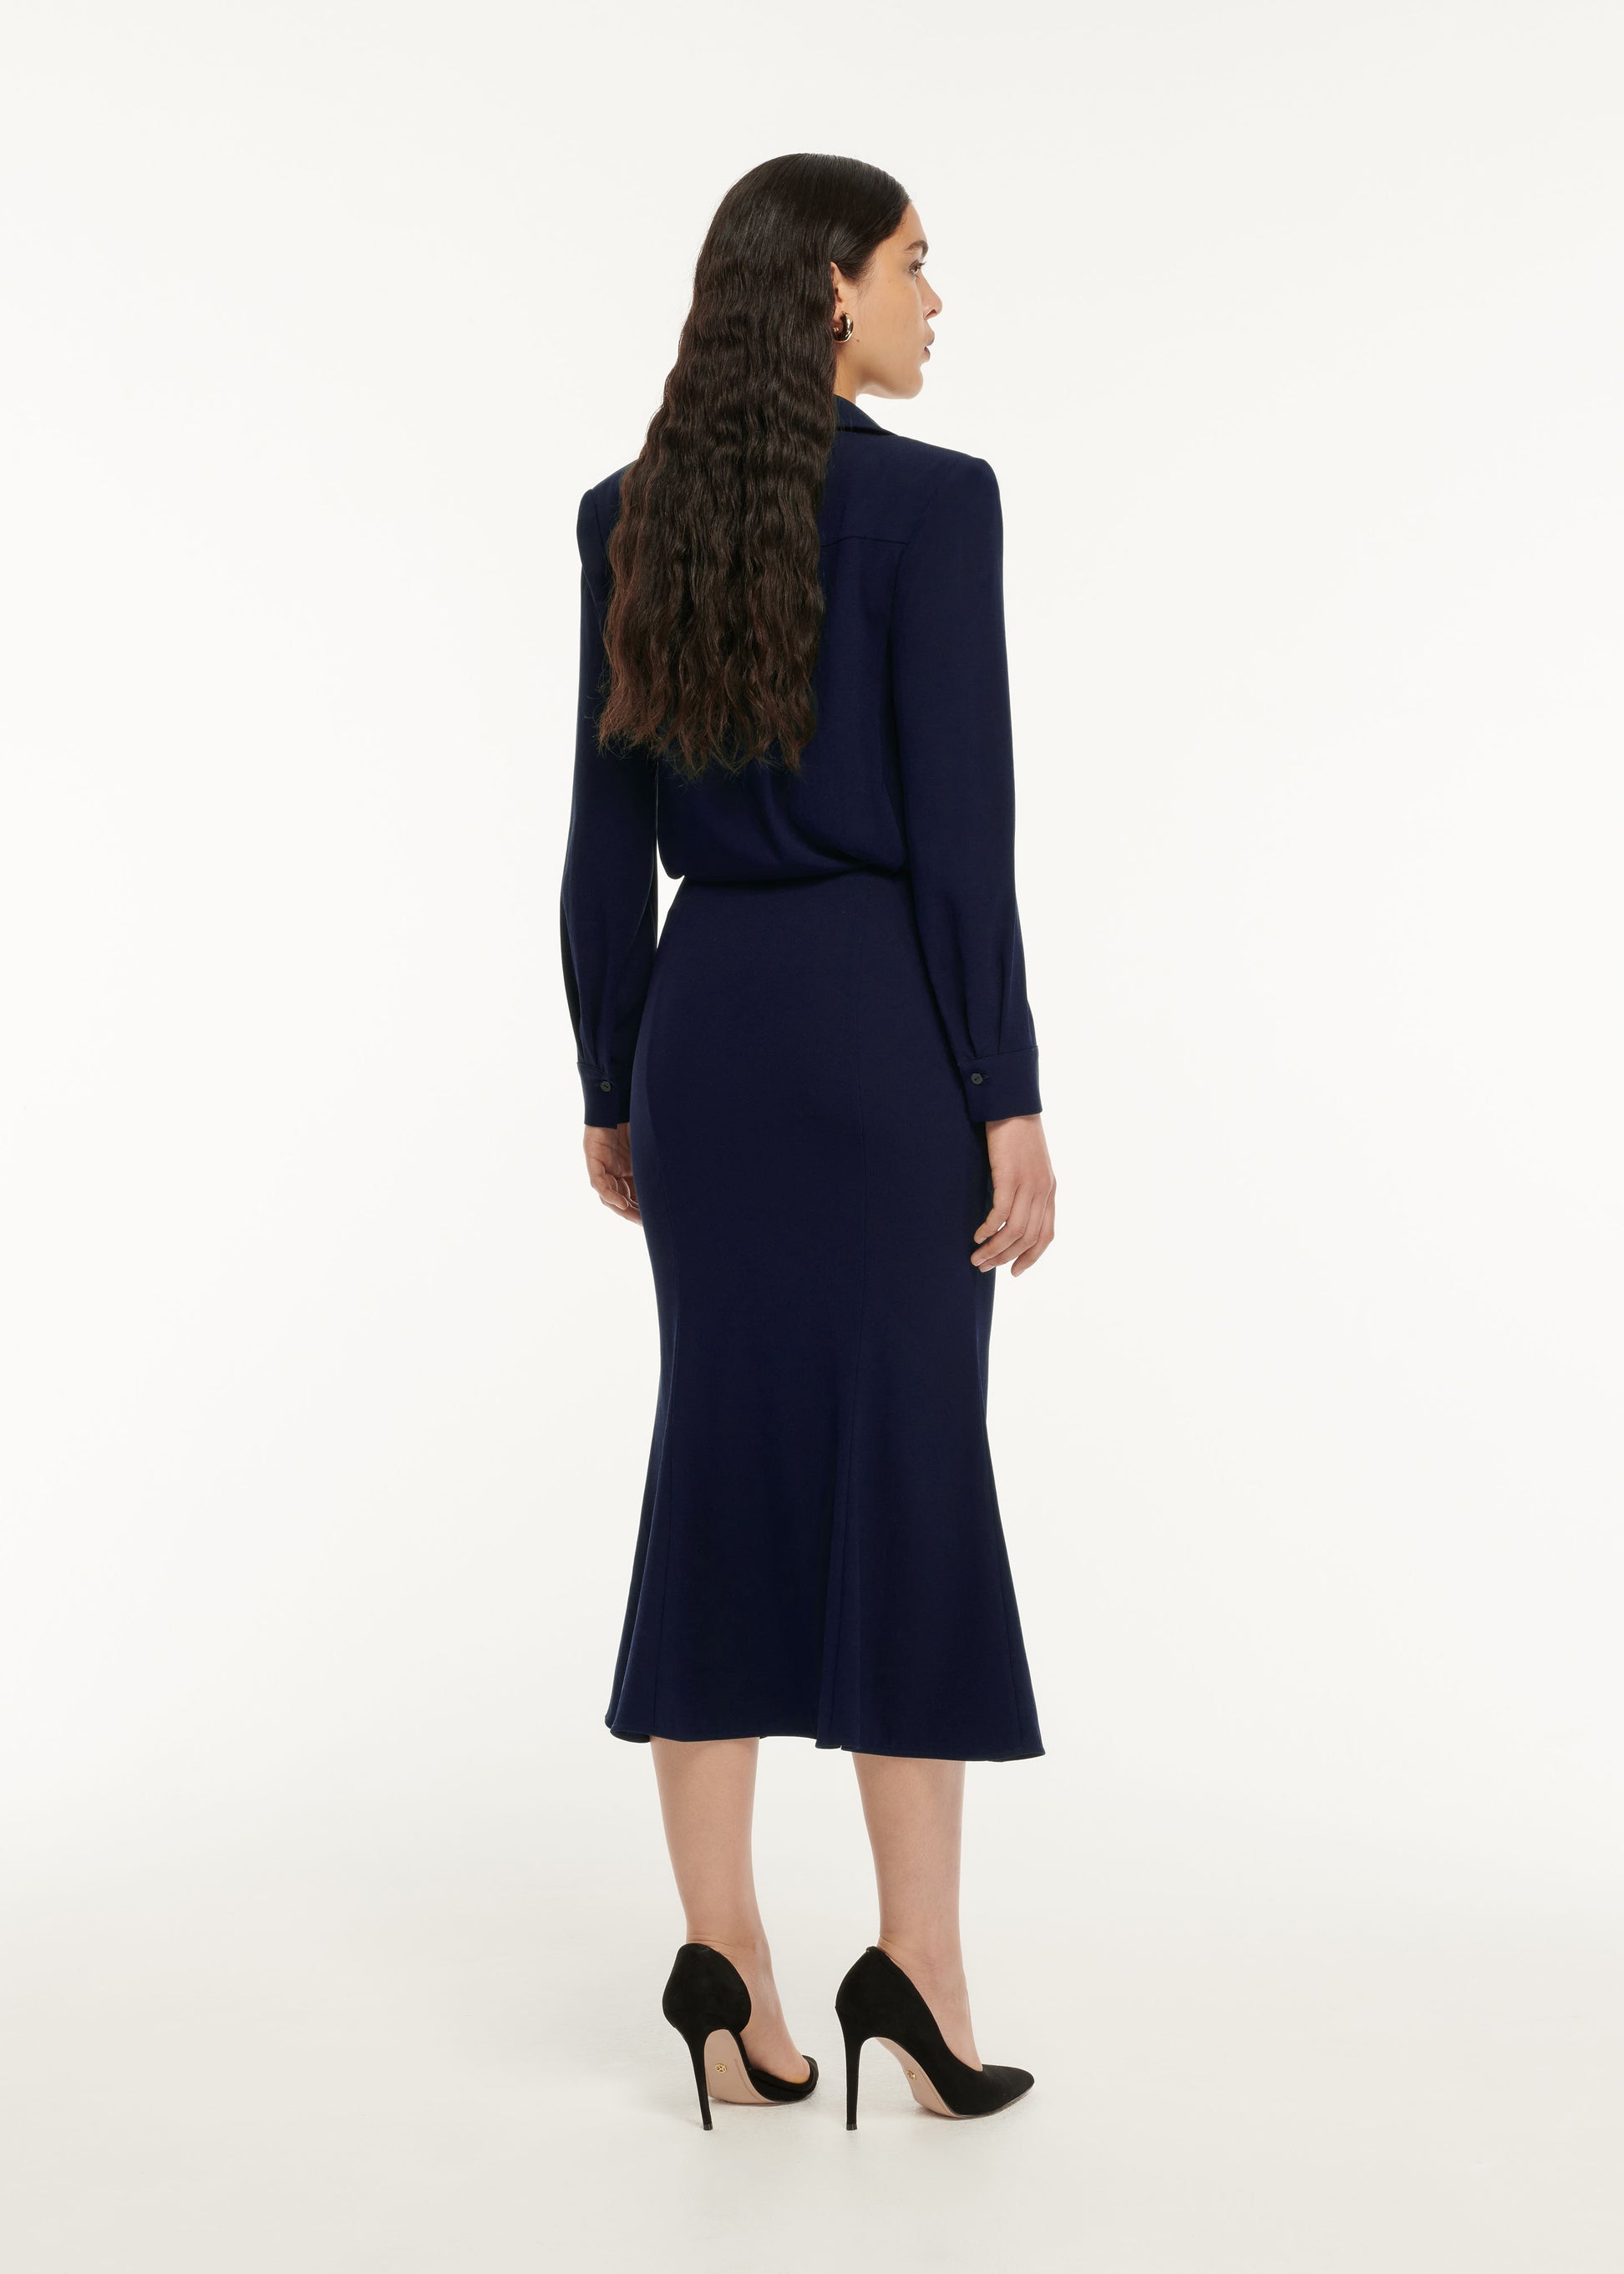 The back of a woman wearing the Long Sleeve Crepe Midi Dress